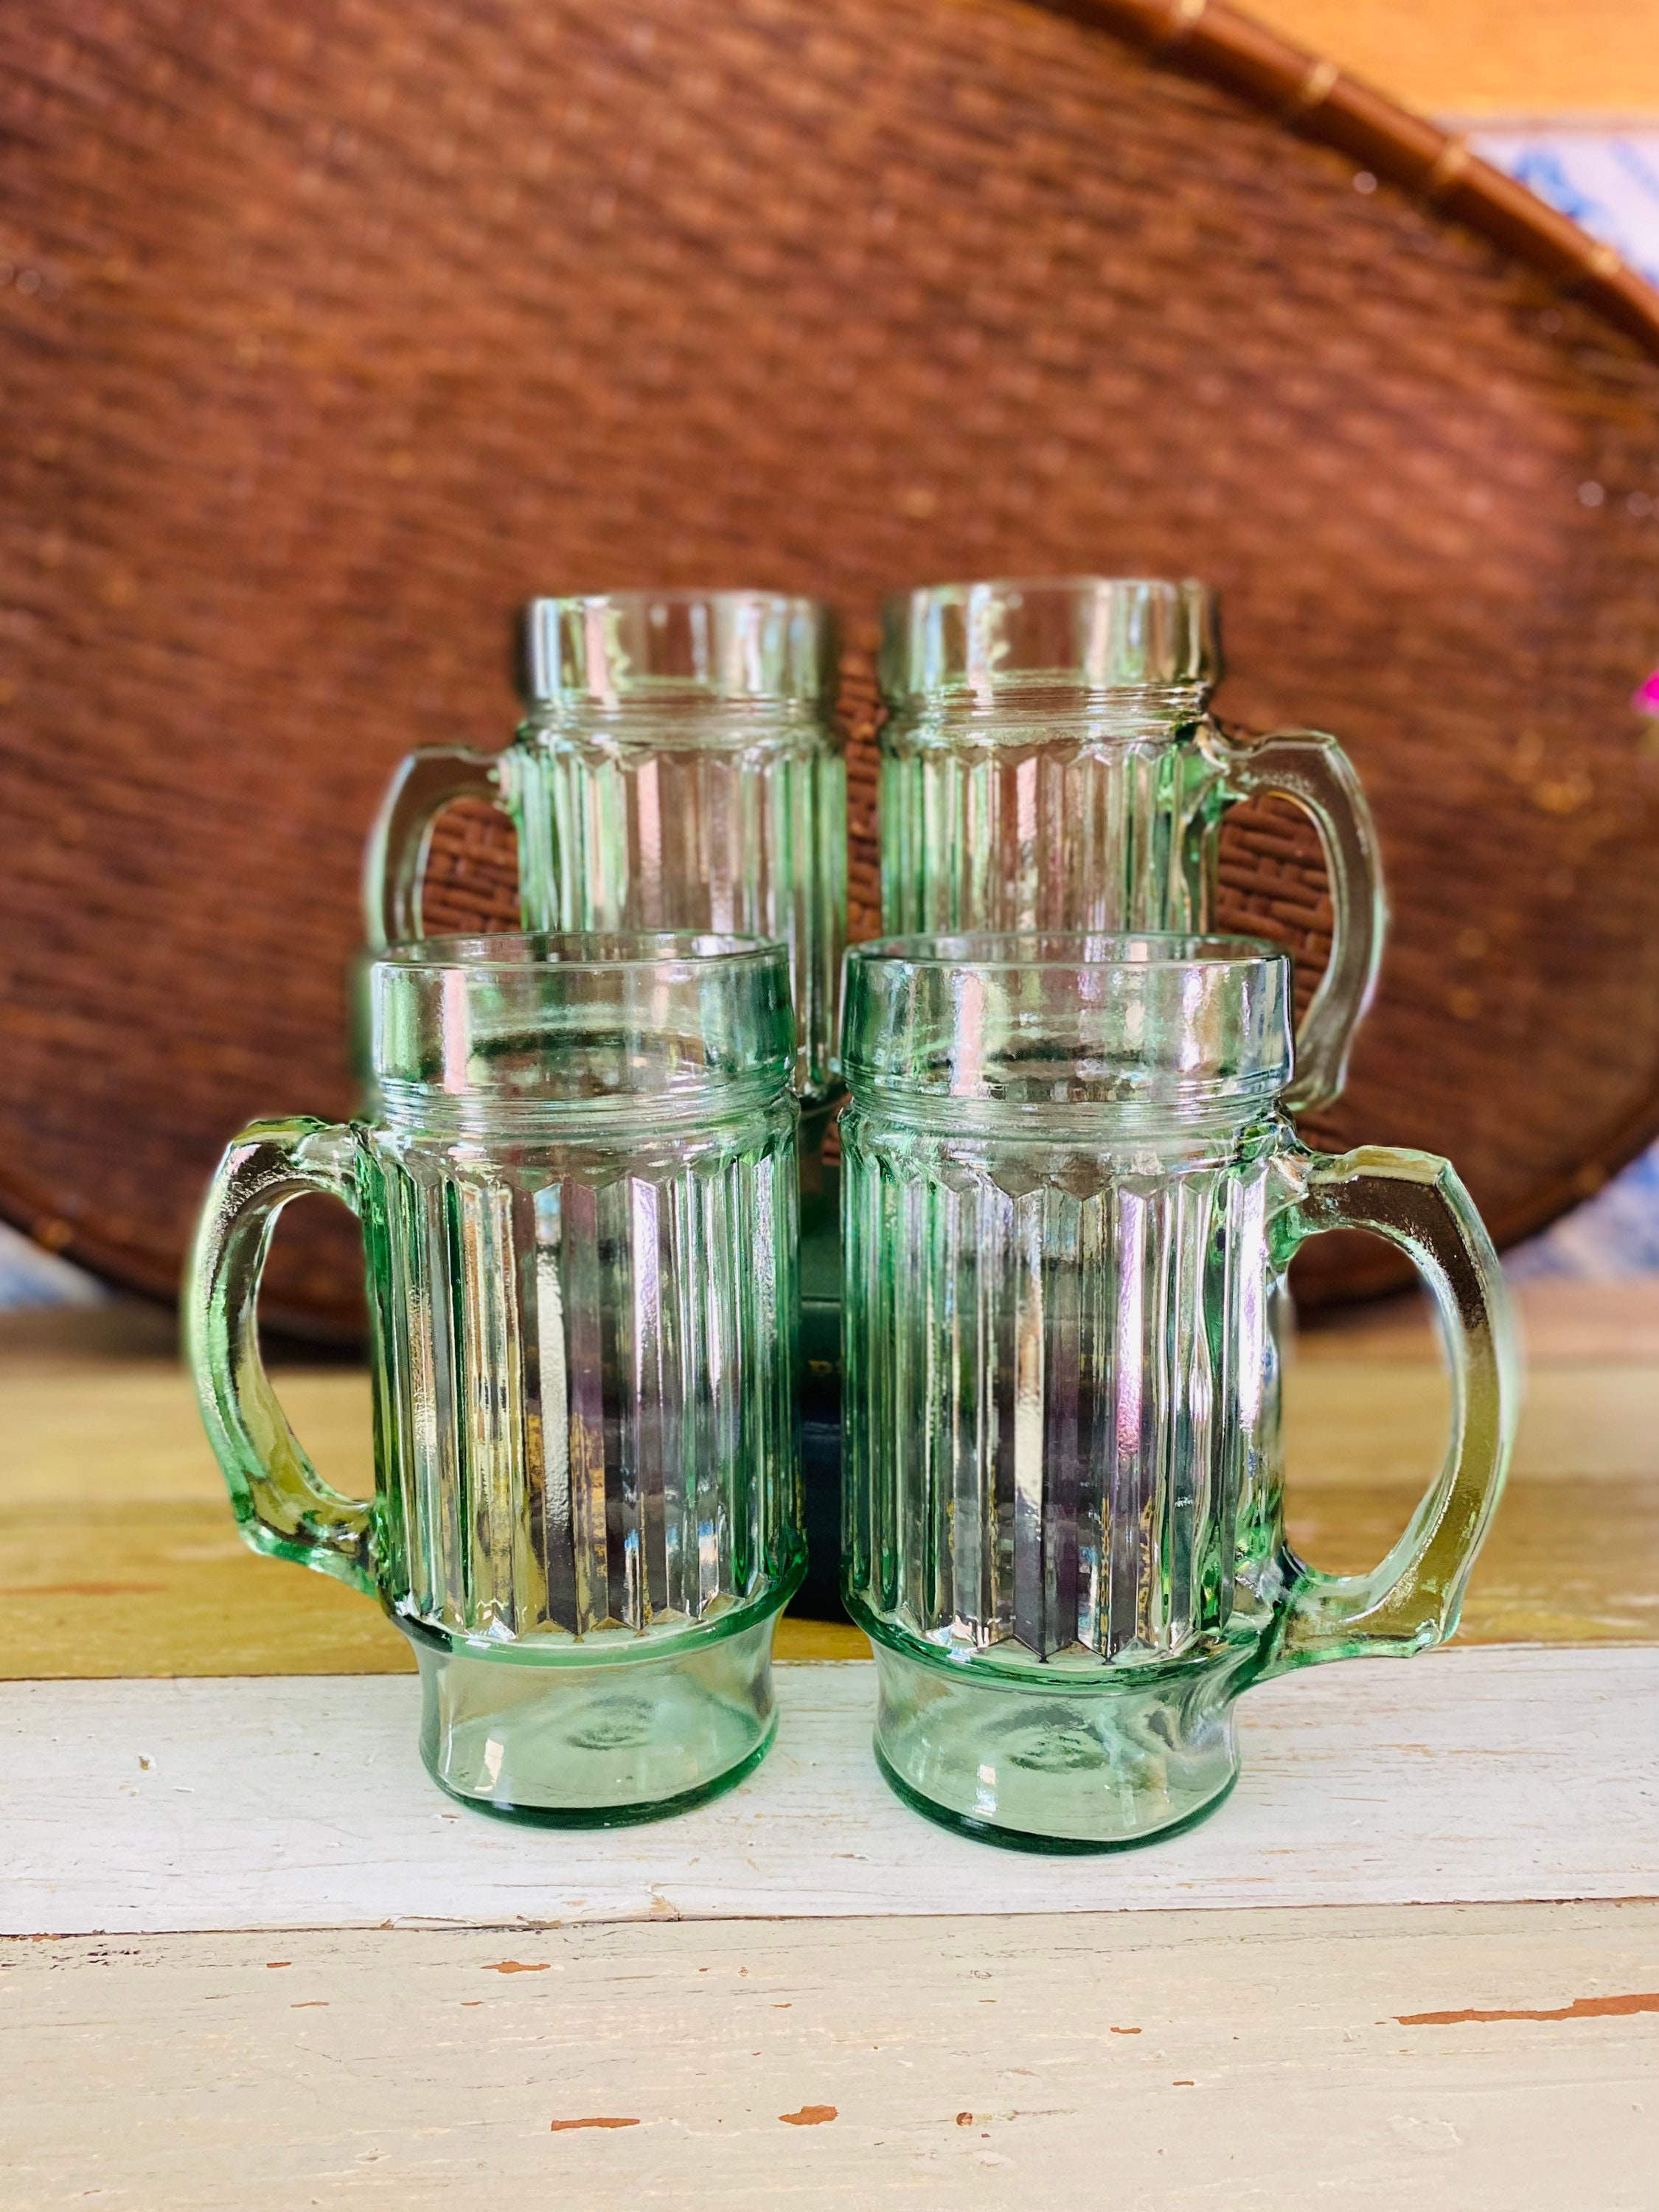 2 Pieces Clear Glass Coffee Mugs with Glass Lids Vintage Vertical Stripes  Tea Mug Classic Ribbed Gla…See more 2 Pieces Clear Glass Coffee Mugs with